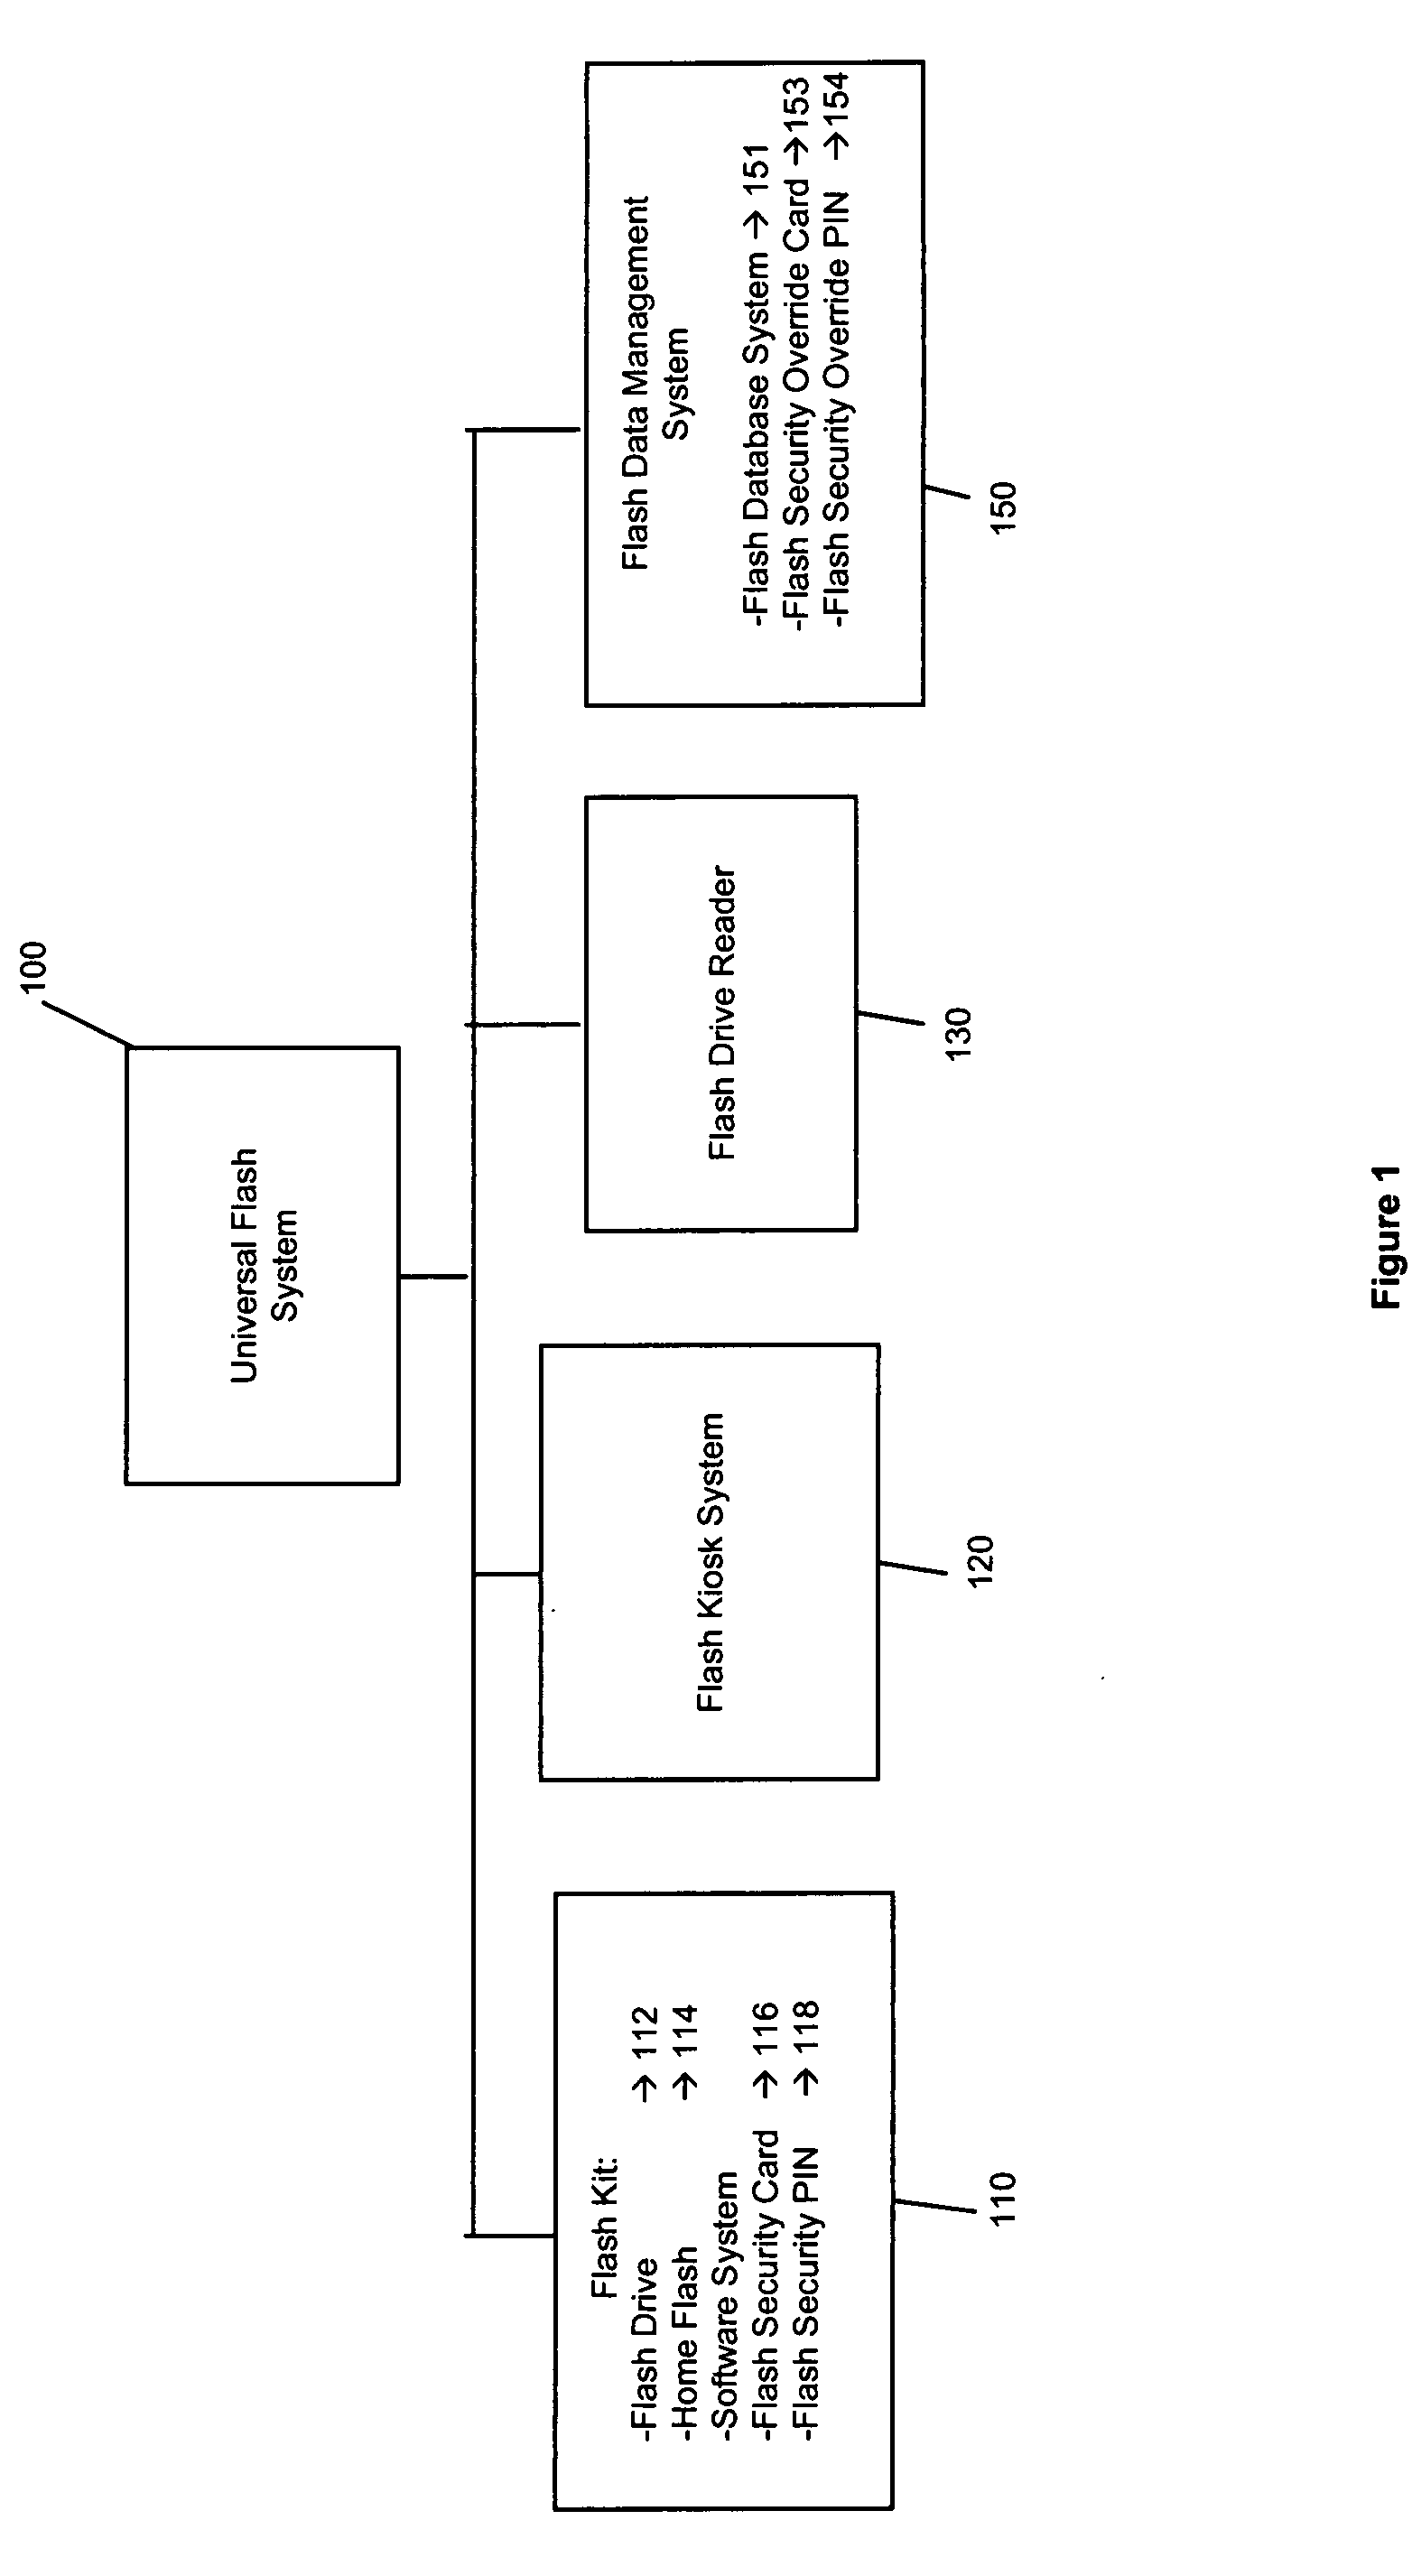 Systems and methods for patient-managed medical records and information